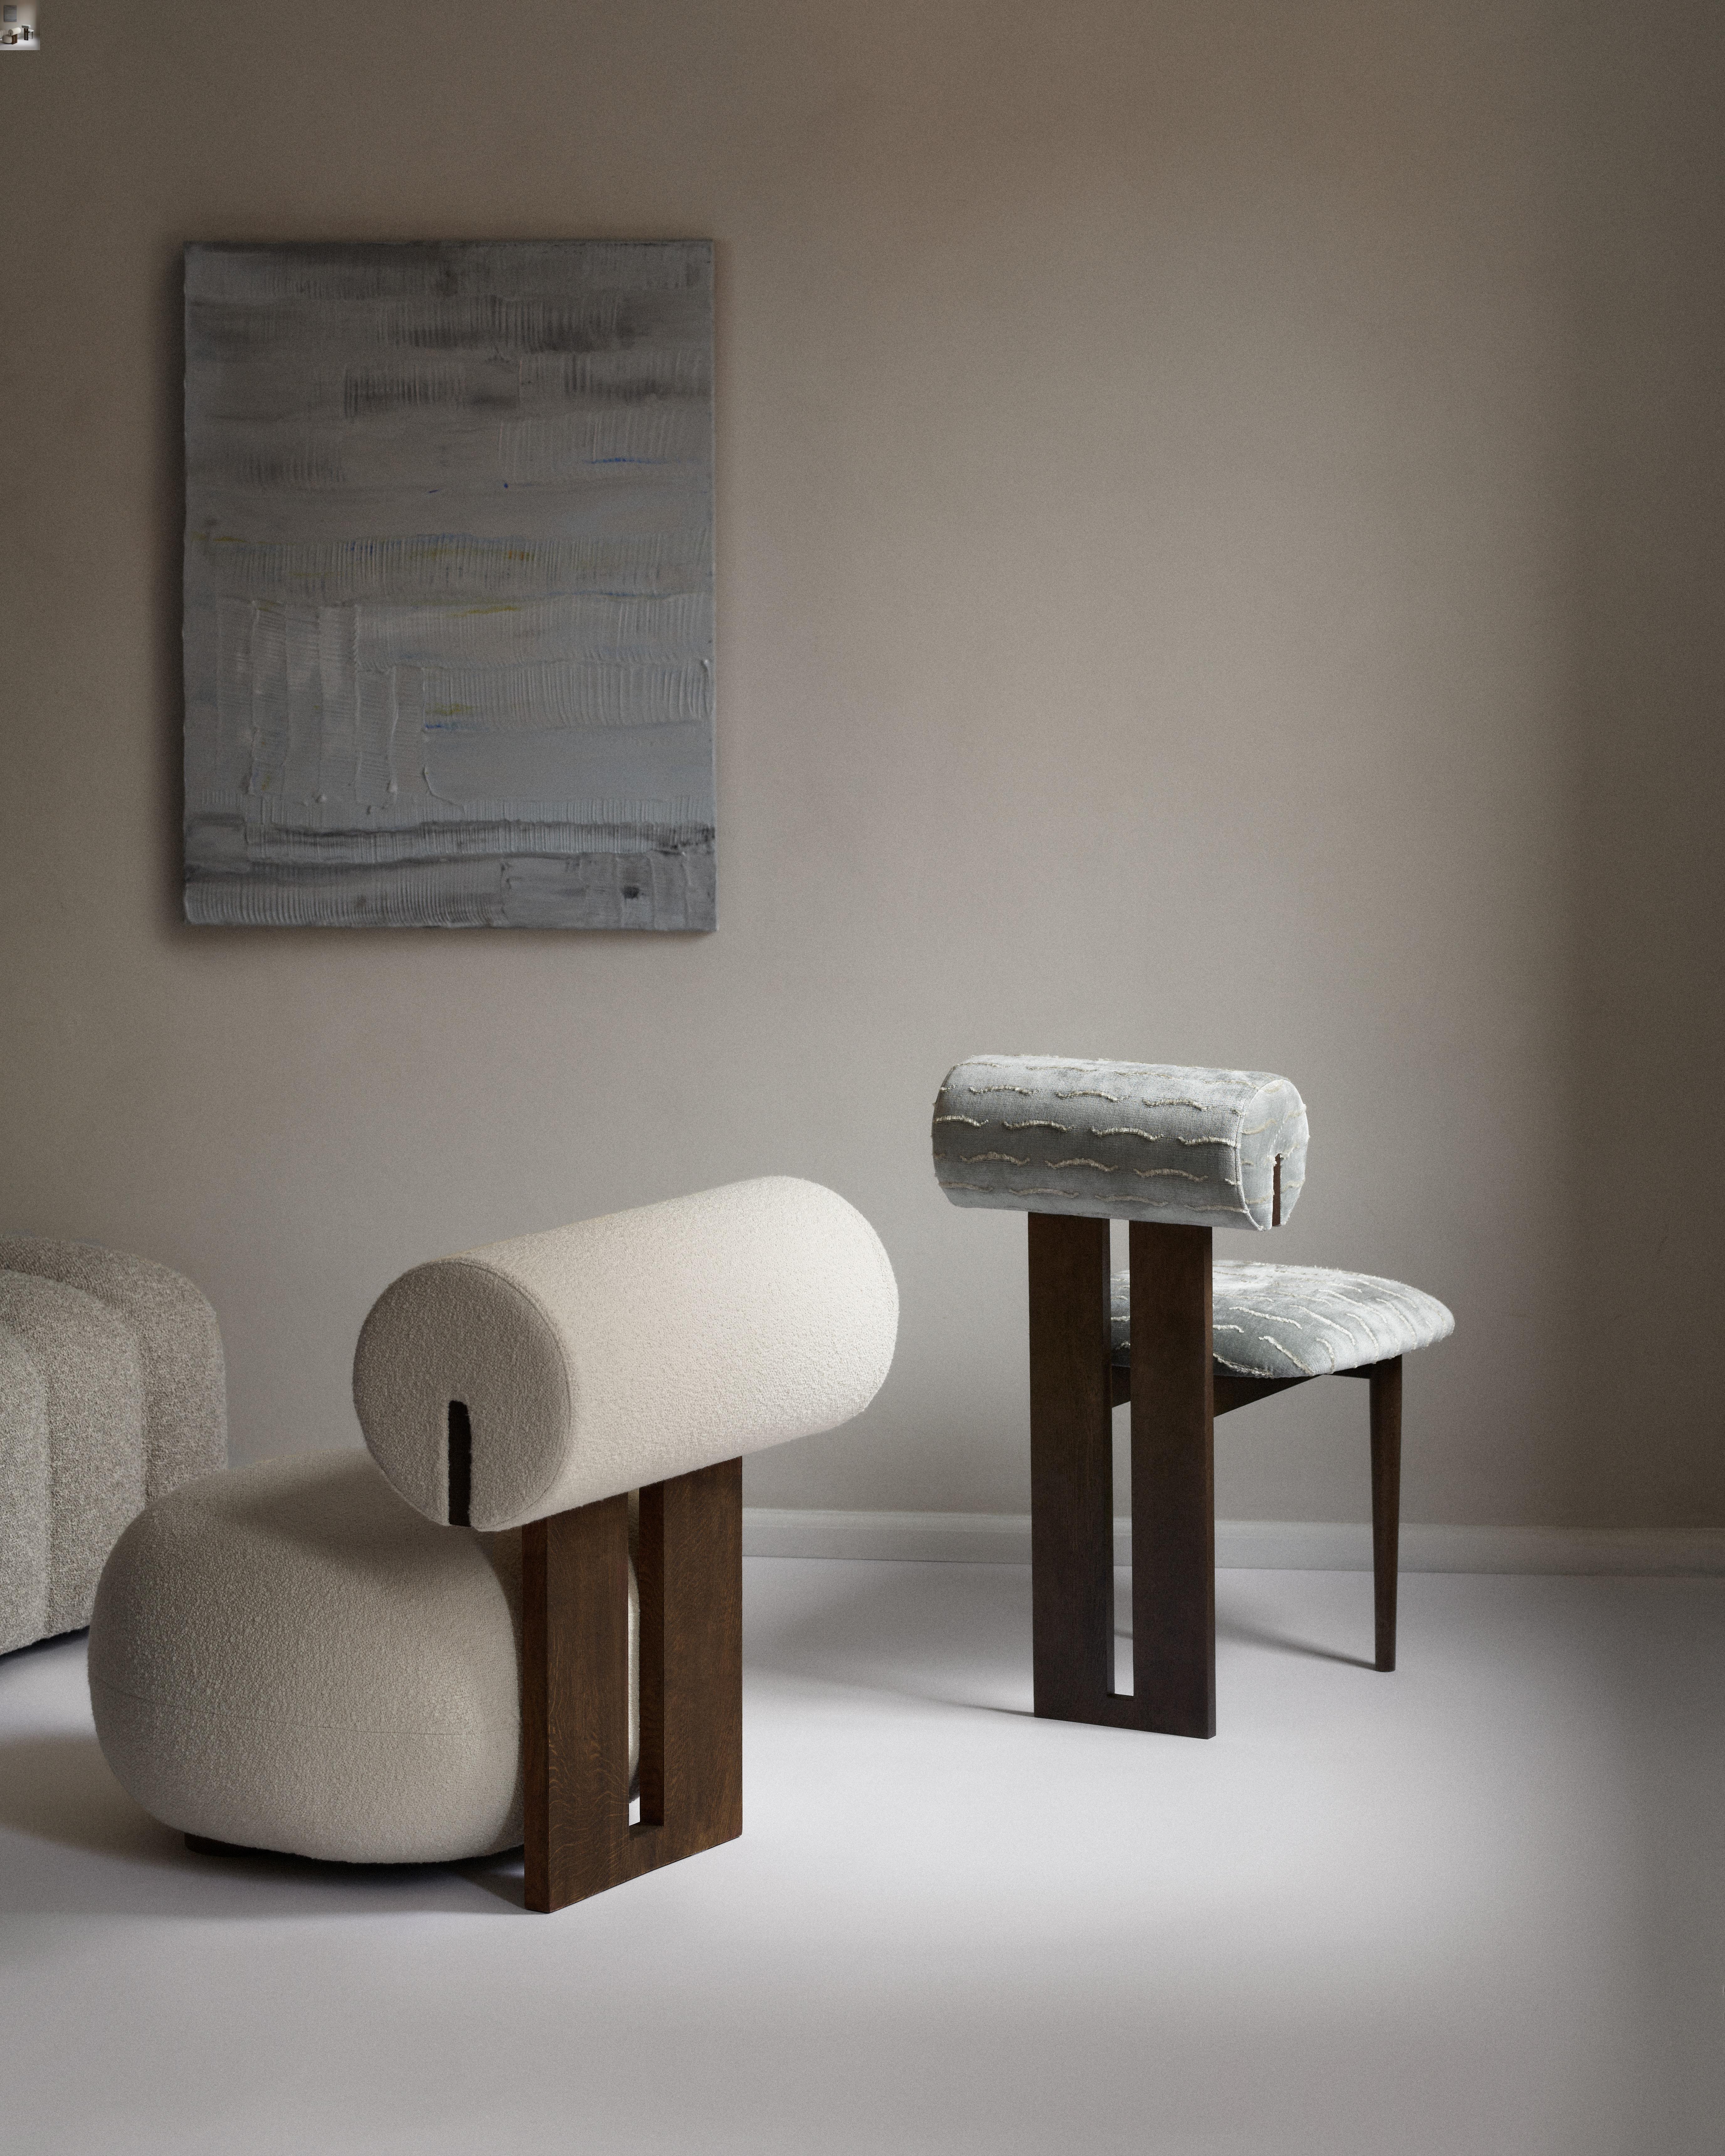 Contemporary 'Hippo' Chair by Norr11, Natural Oak, Kvadrat Canvas 694 For Sale